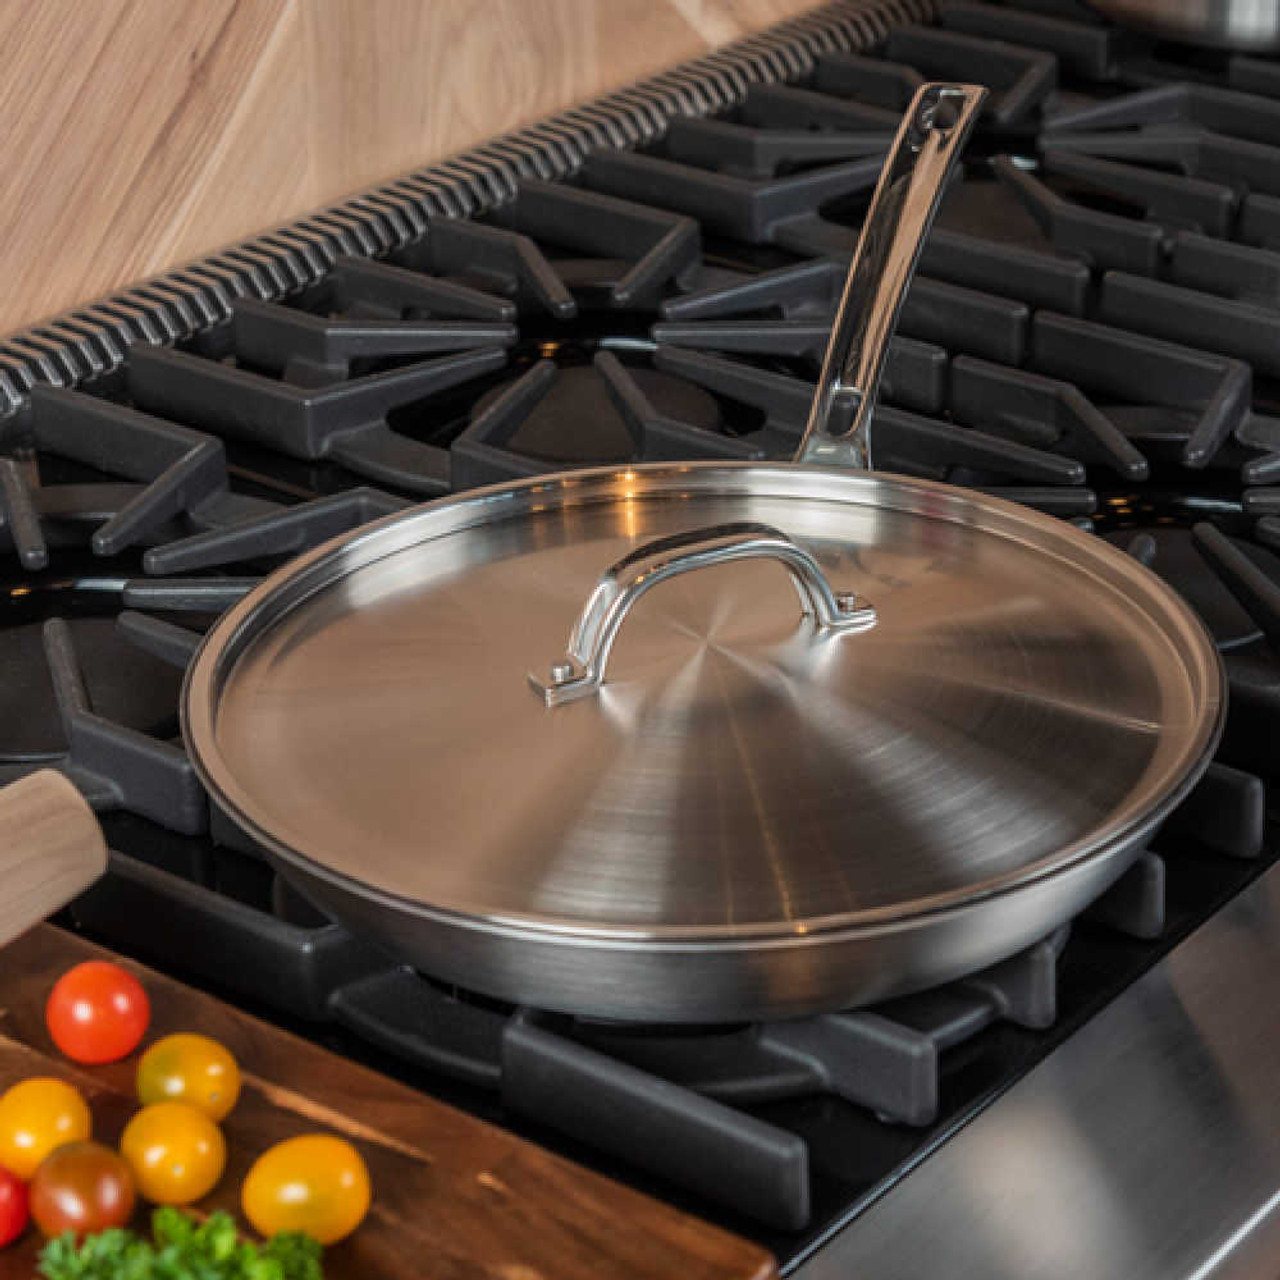 https://cdn11.bigcommerce.com/s-hccytny0od/images/stencil/1280x1280/products/4813/19725/Viking_Professional_5-Ply_Eterna_Nonstick_Covered_12-Inch_Fry_Pan_2__29797.1656110640.jpg?c=2?imbypass=on